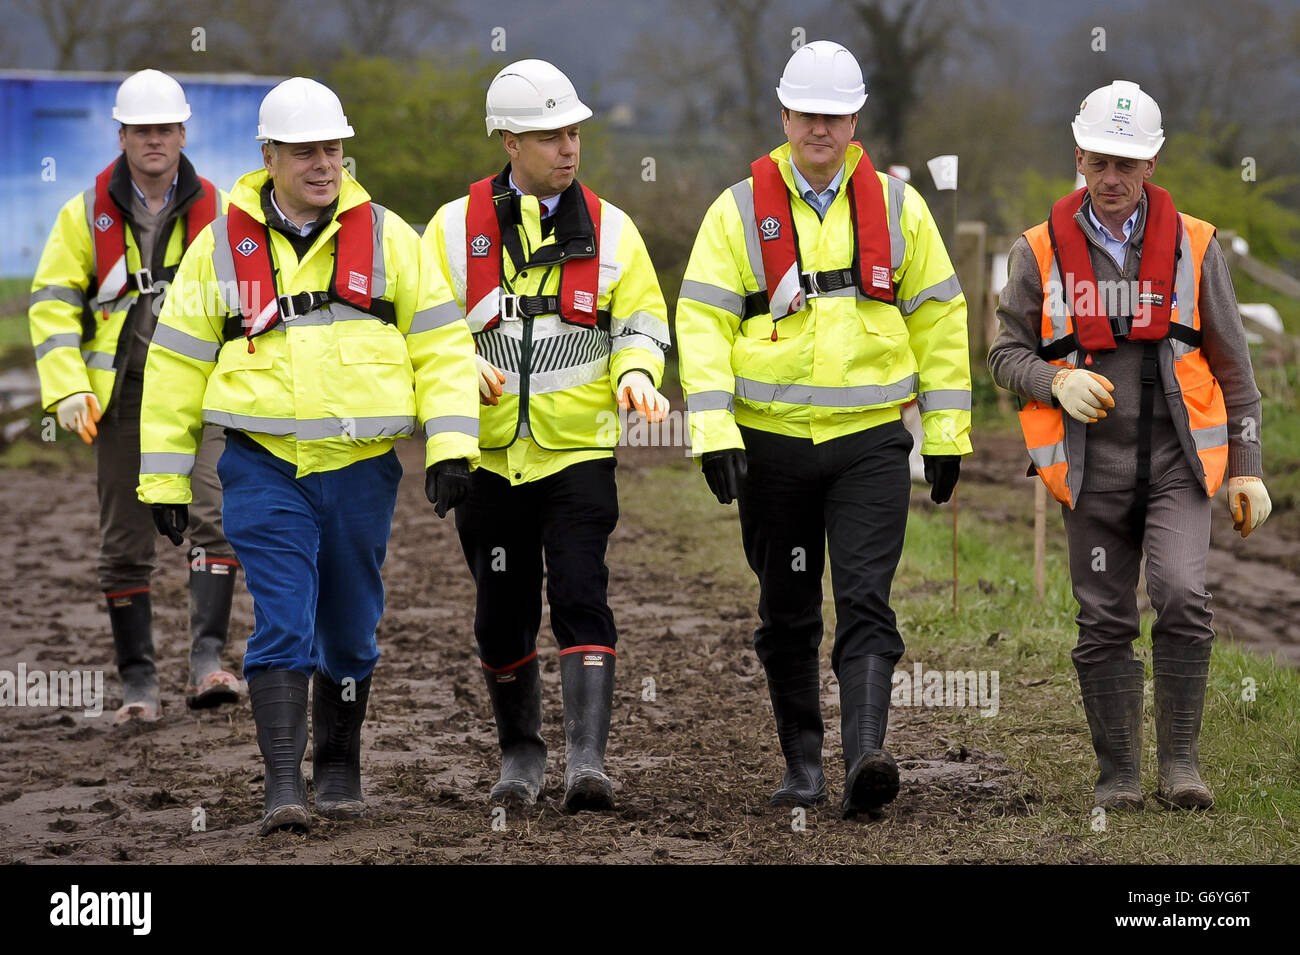 Prime Minister David Cameron (second right) wears full PPE including steel toe-capped boots, high-viz vest, life-jacket, gloves and hard-hat as he arrives on site at the dredging works on the River Parrett, near Burrowbridge, Somerset, where repair and recovery from the floods earlier in 2014 are taking place. Stock Photo